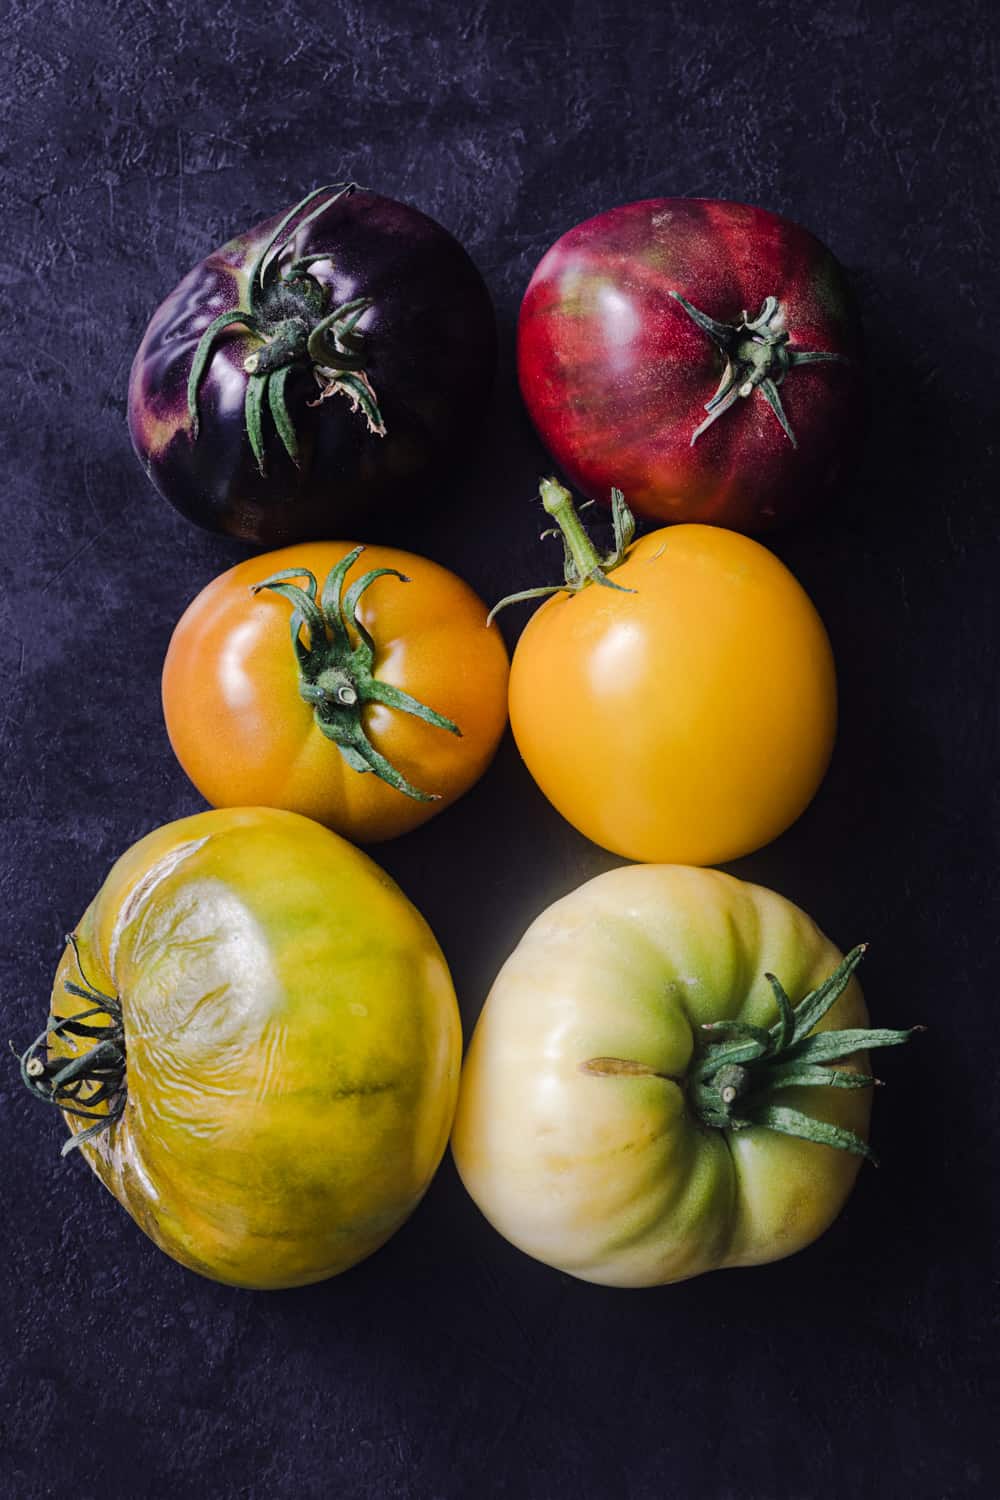 A tomato rainbow! 6 heirloom tomatoes in different colors: Deep purple, deep red, orange, yellow, yellow-green and green-white.